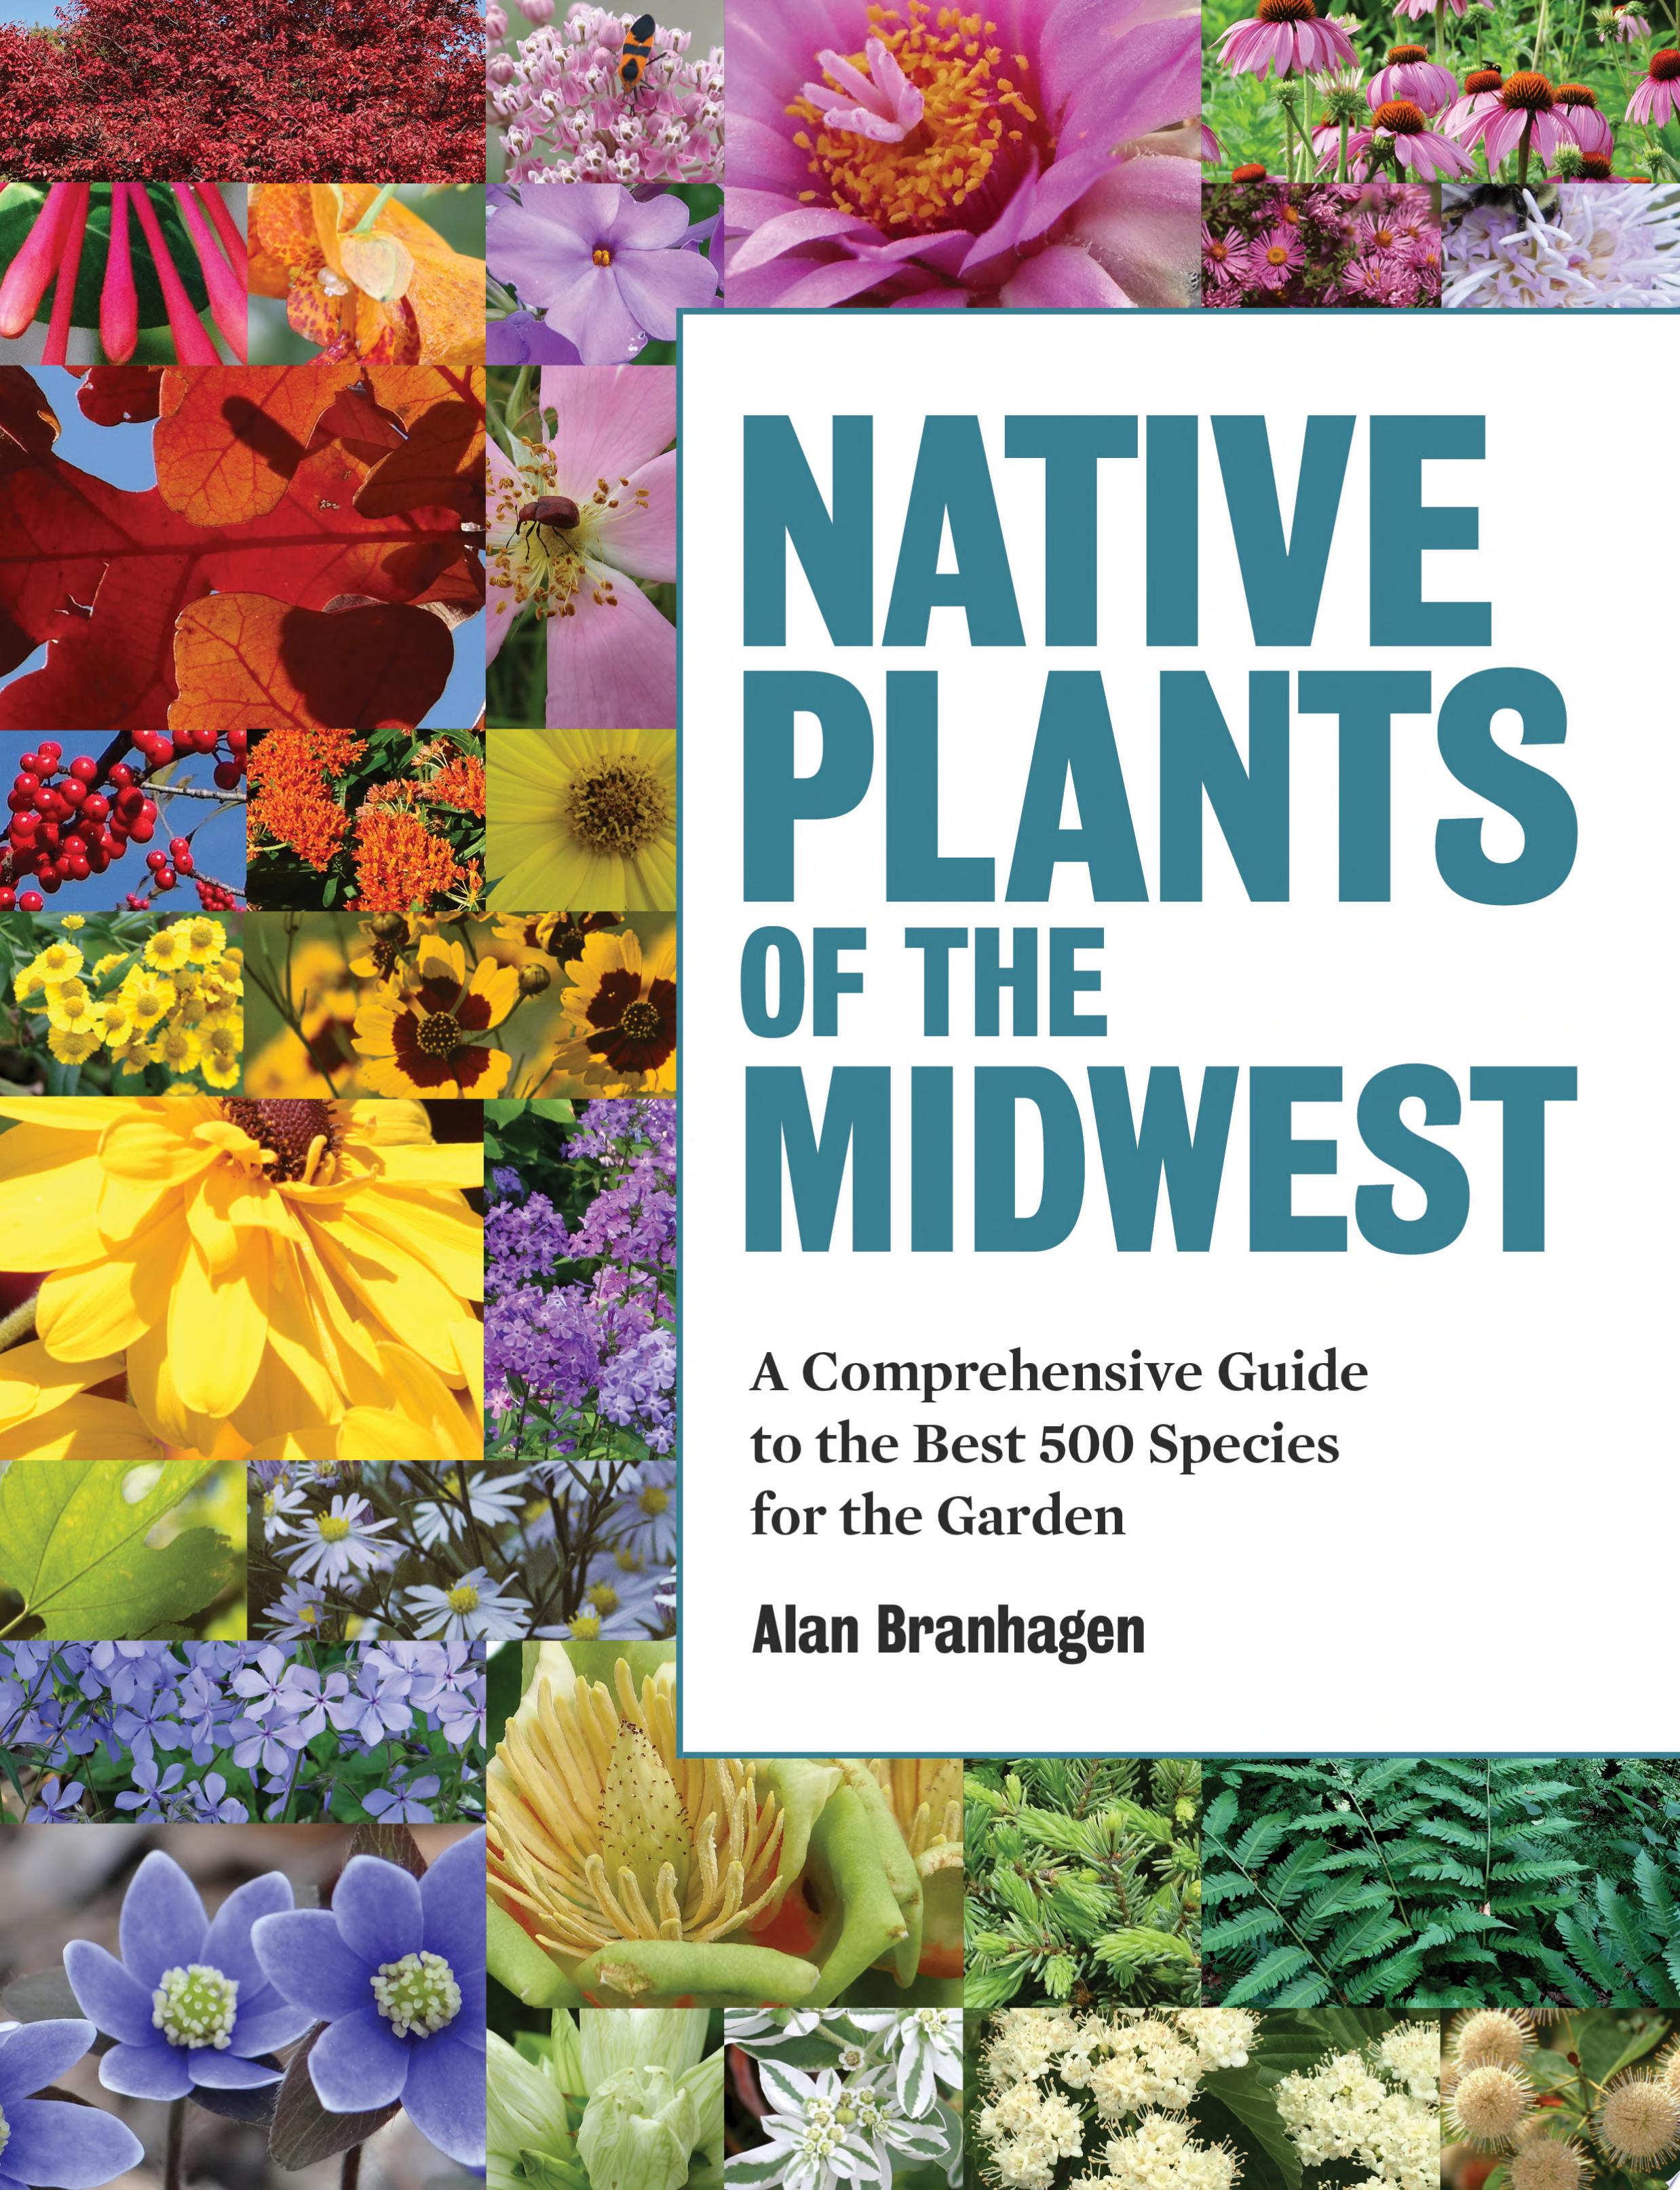 Image for "Native Plants of the Midwest"